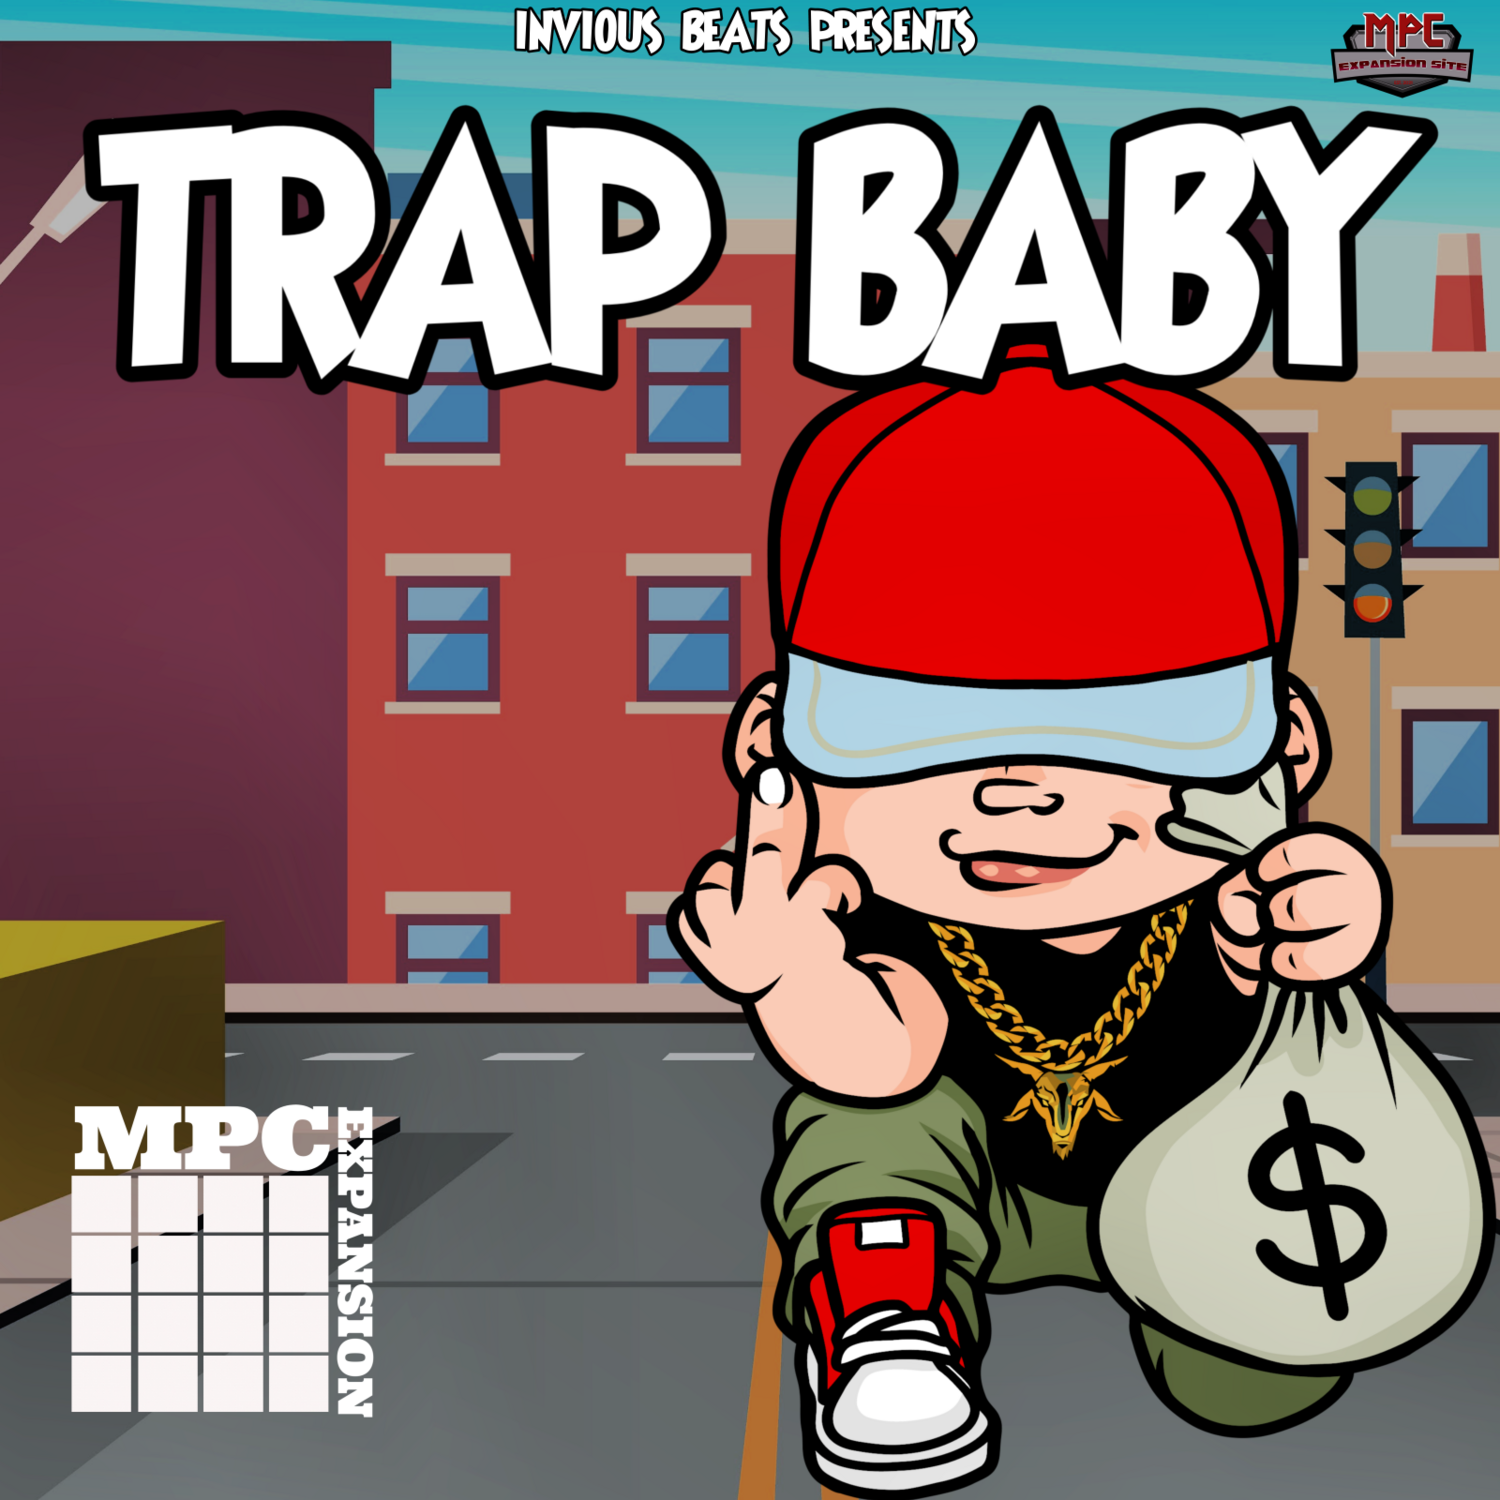 MPC EXPANSION 'TRAP BABY' by INVIOUS